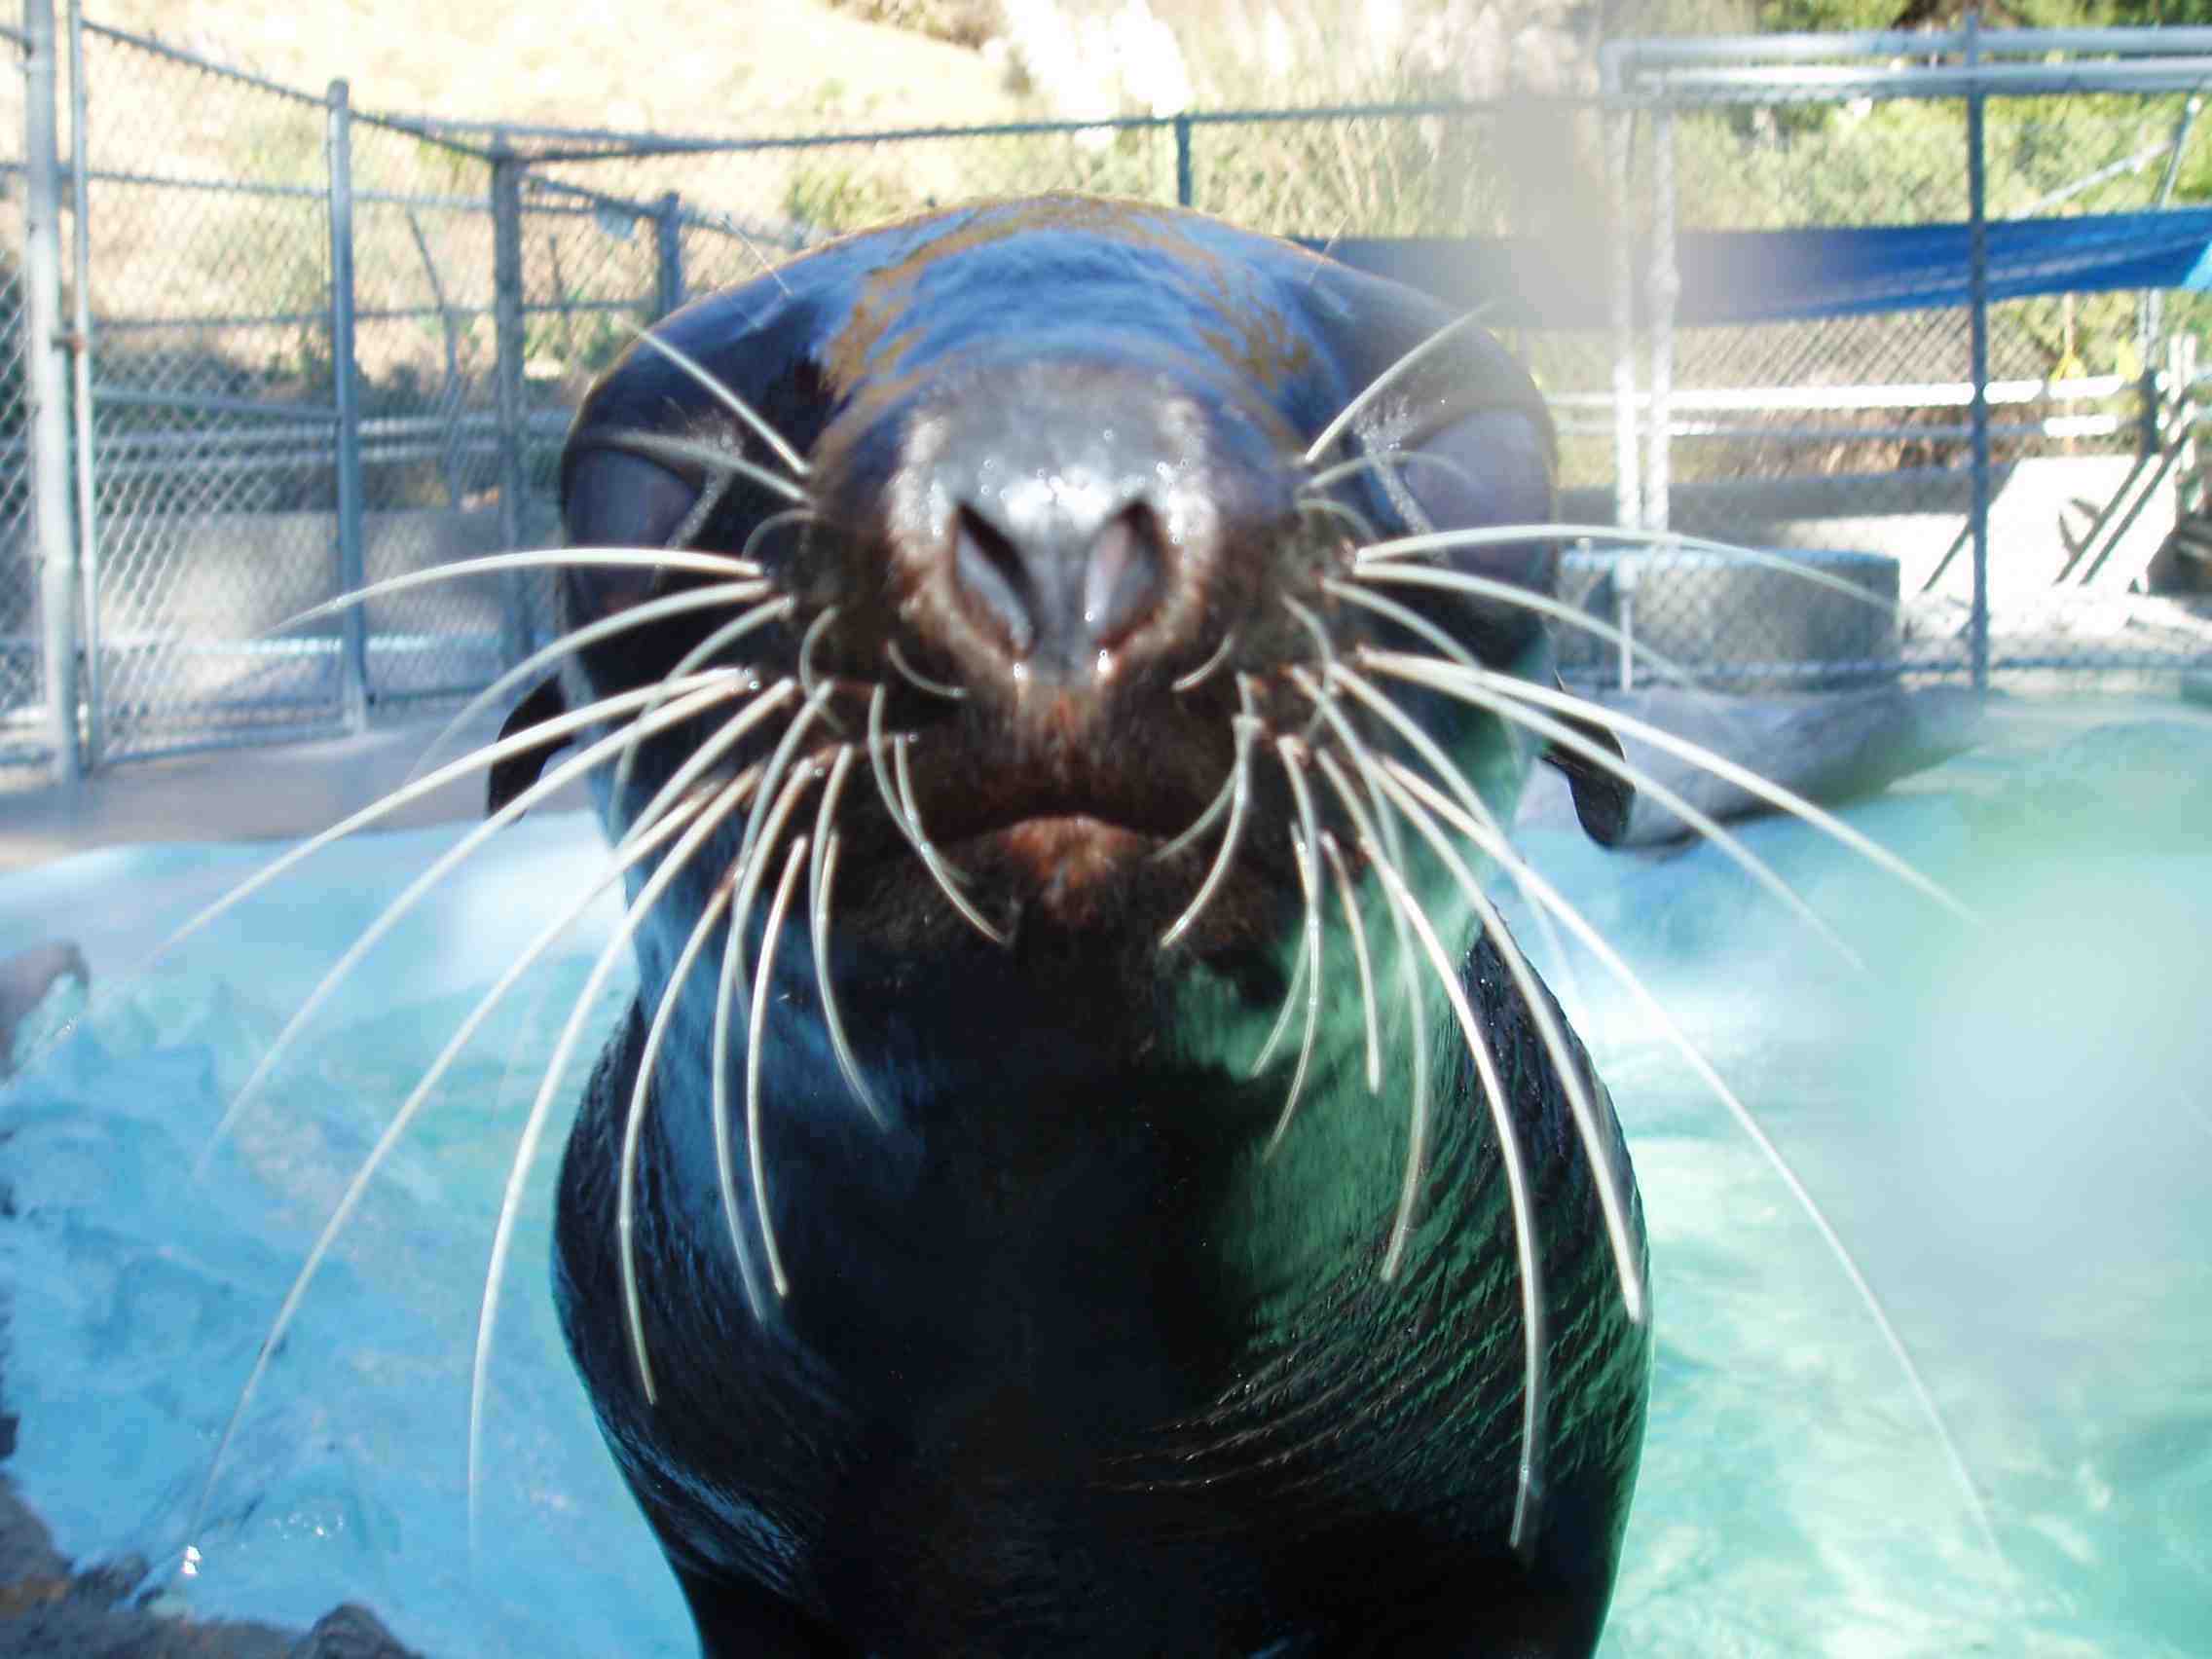 Mike Ryan helped rescue this seal off the CA coast
            in 2005.